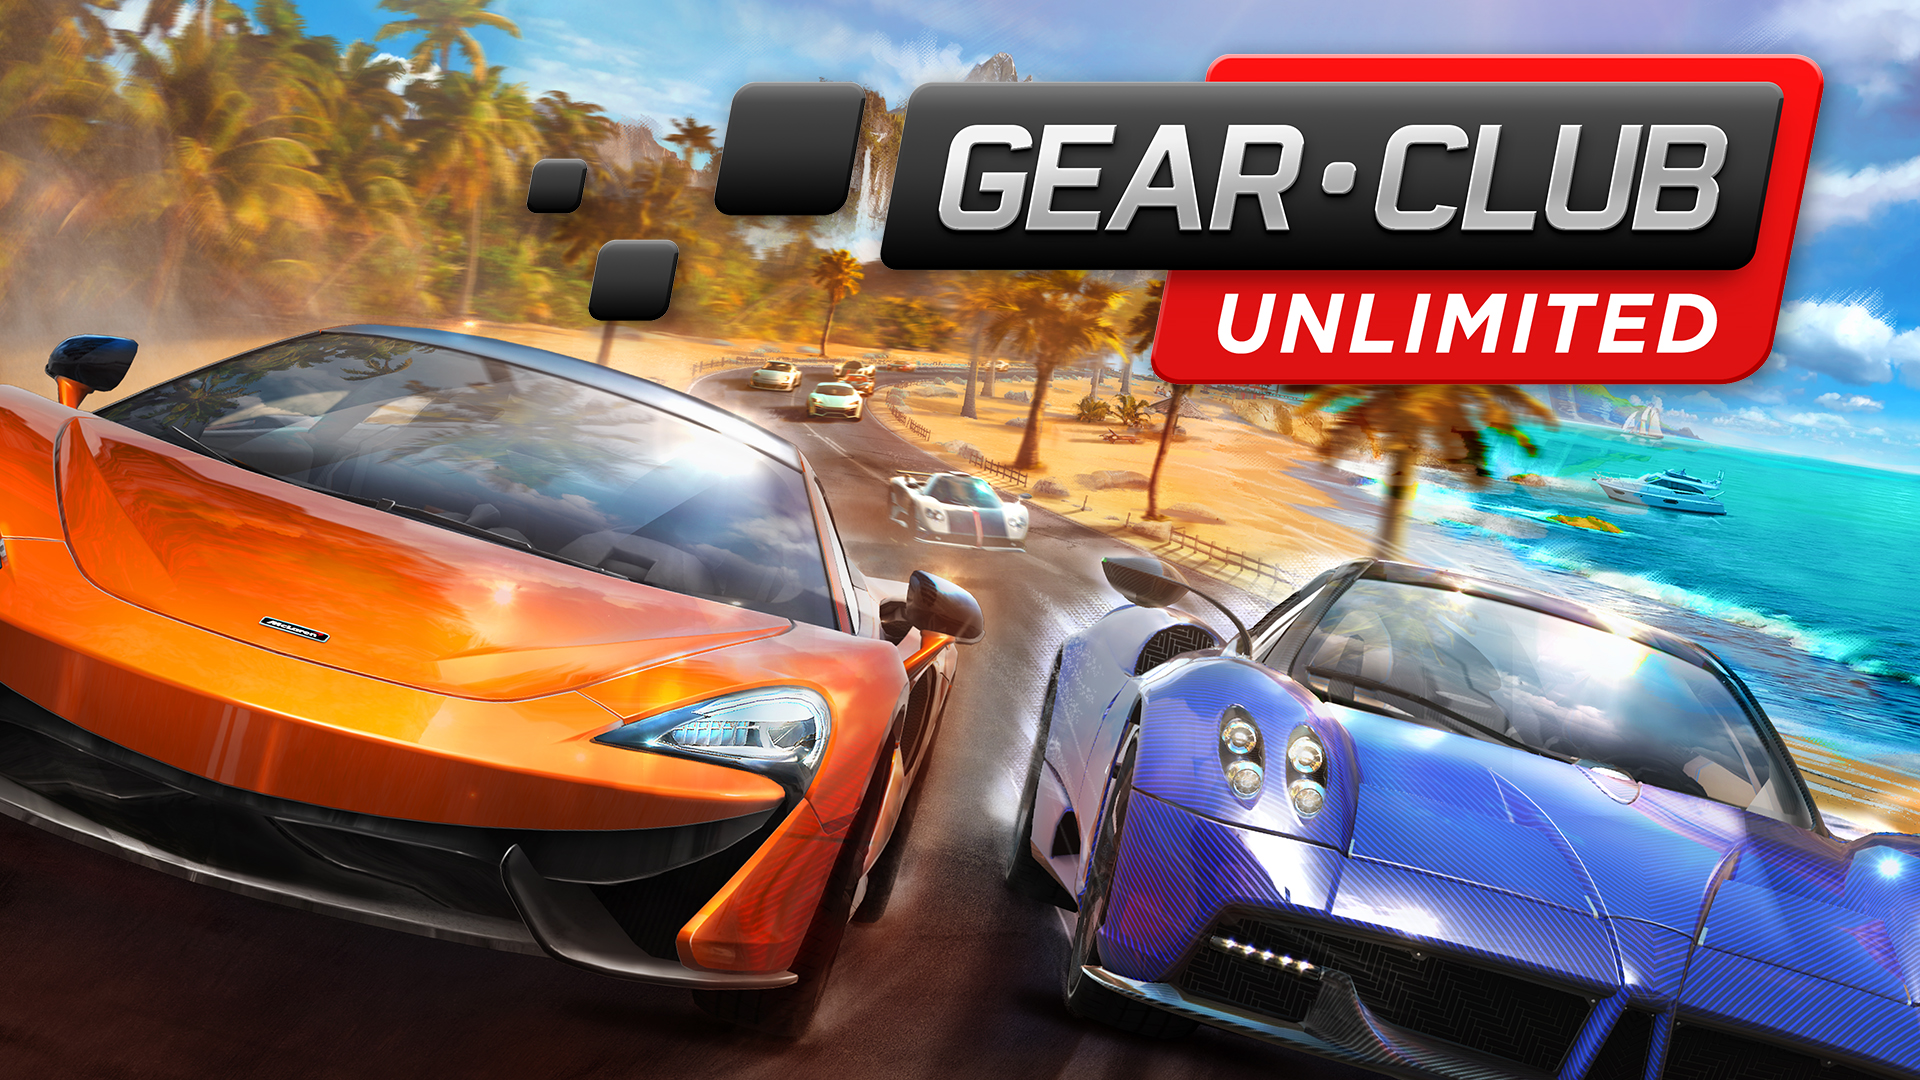 Gear.Club Unlimited 2 – Tracks Edition Unveils Itself With New Screenshots